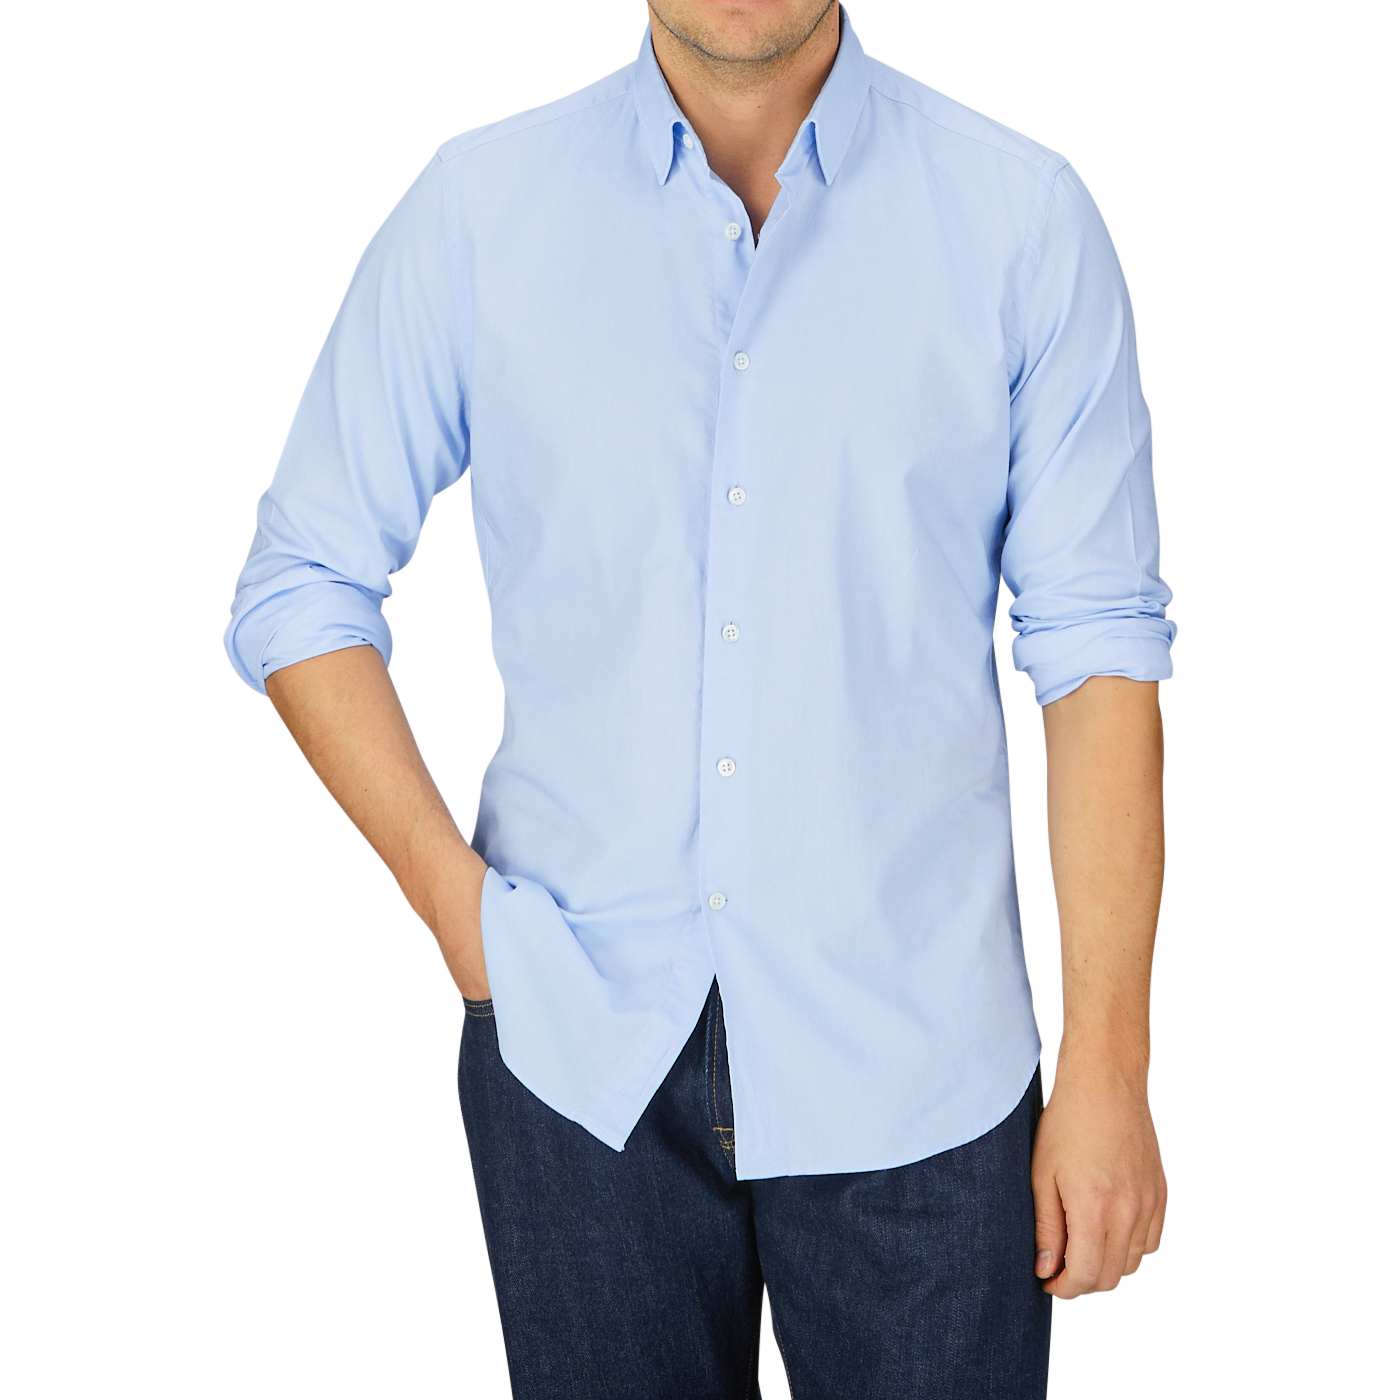 Man wearing a Glanshirt Light Blue Cotton Oxford Regular Shirt with mother-of-pearl buttons and jeans against a grey background.